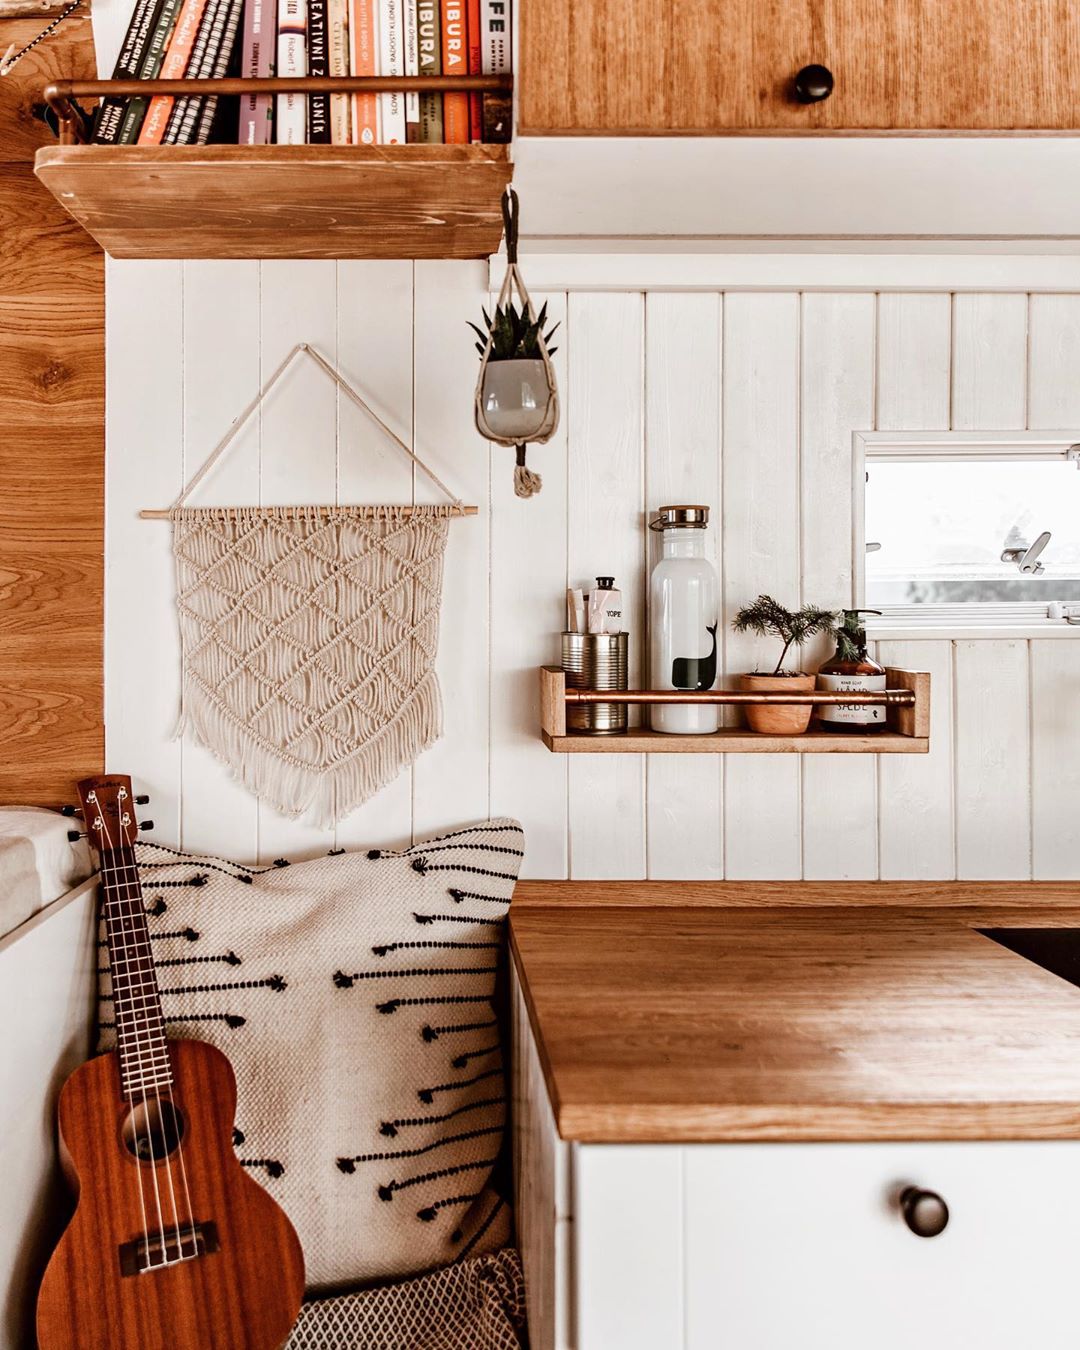 White wood walls with brown shelf. Photo by Instagram user @nomathehappyvan